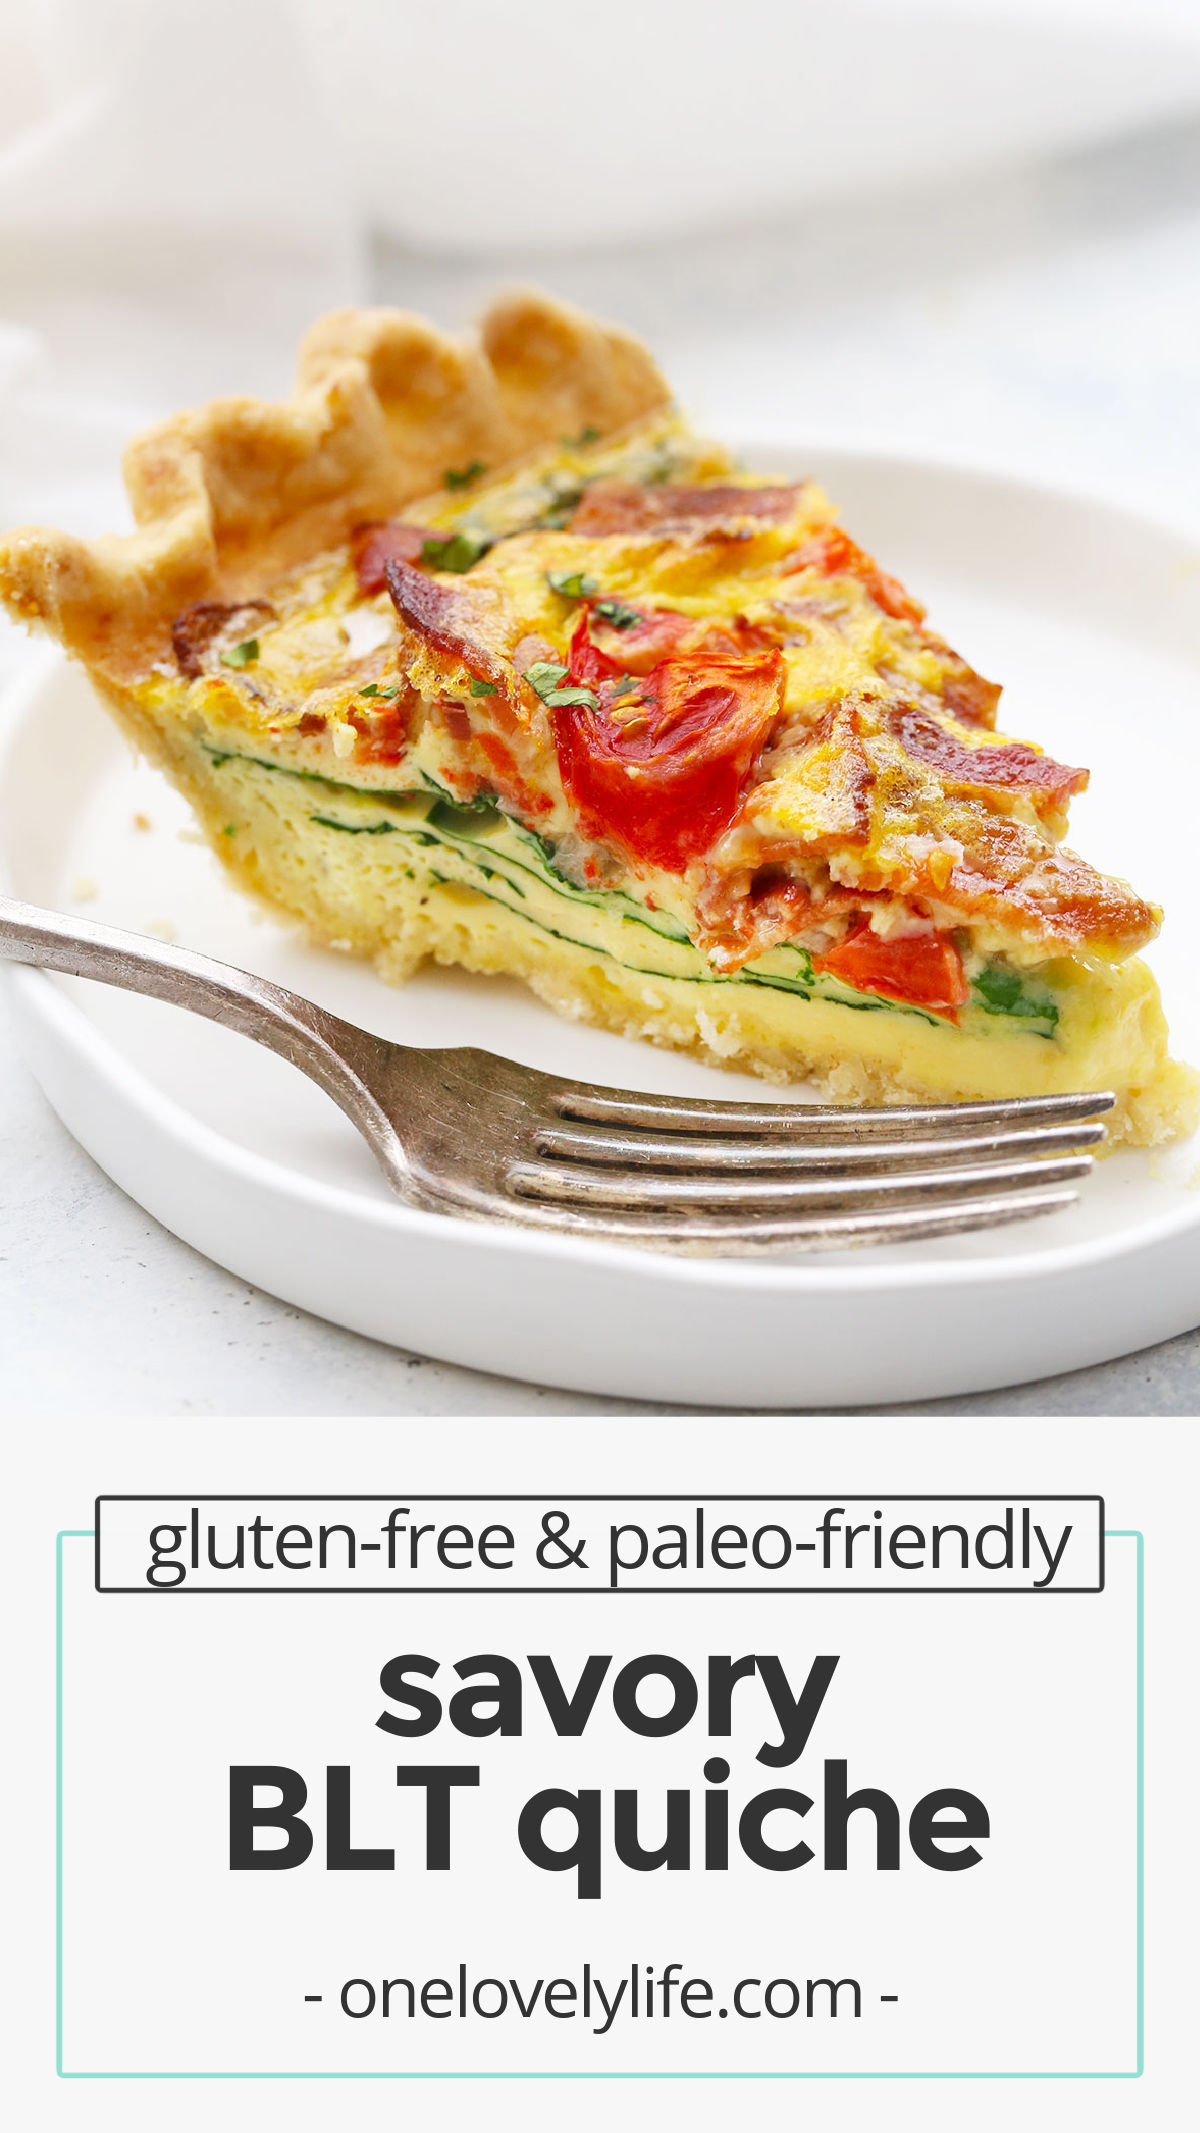 BLT Quiche - Classic BLT flavors with a breakfast twist! This quiche is loaded with bacon, greens, tomatoes, and more to take your breakfast or brunch to the next level! (Gluten Free & Paleo-Friendly) // Bacon quiche recipe // spinach quiche // tomato quiche recipe // paleo quiche // whole30 quiche // dairy free quiche // paleo quiche // gluten free quiche // paleo brunch // easter brunch // healthy brunch //